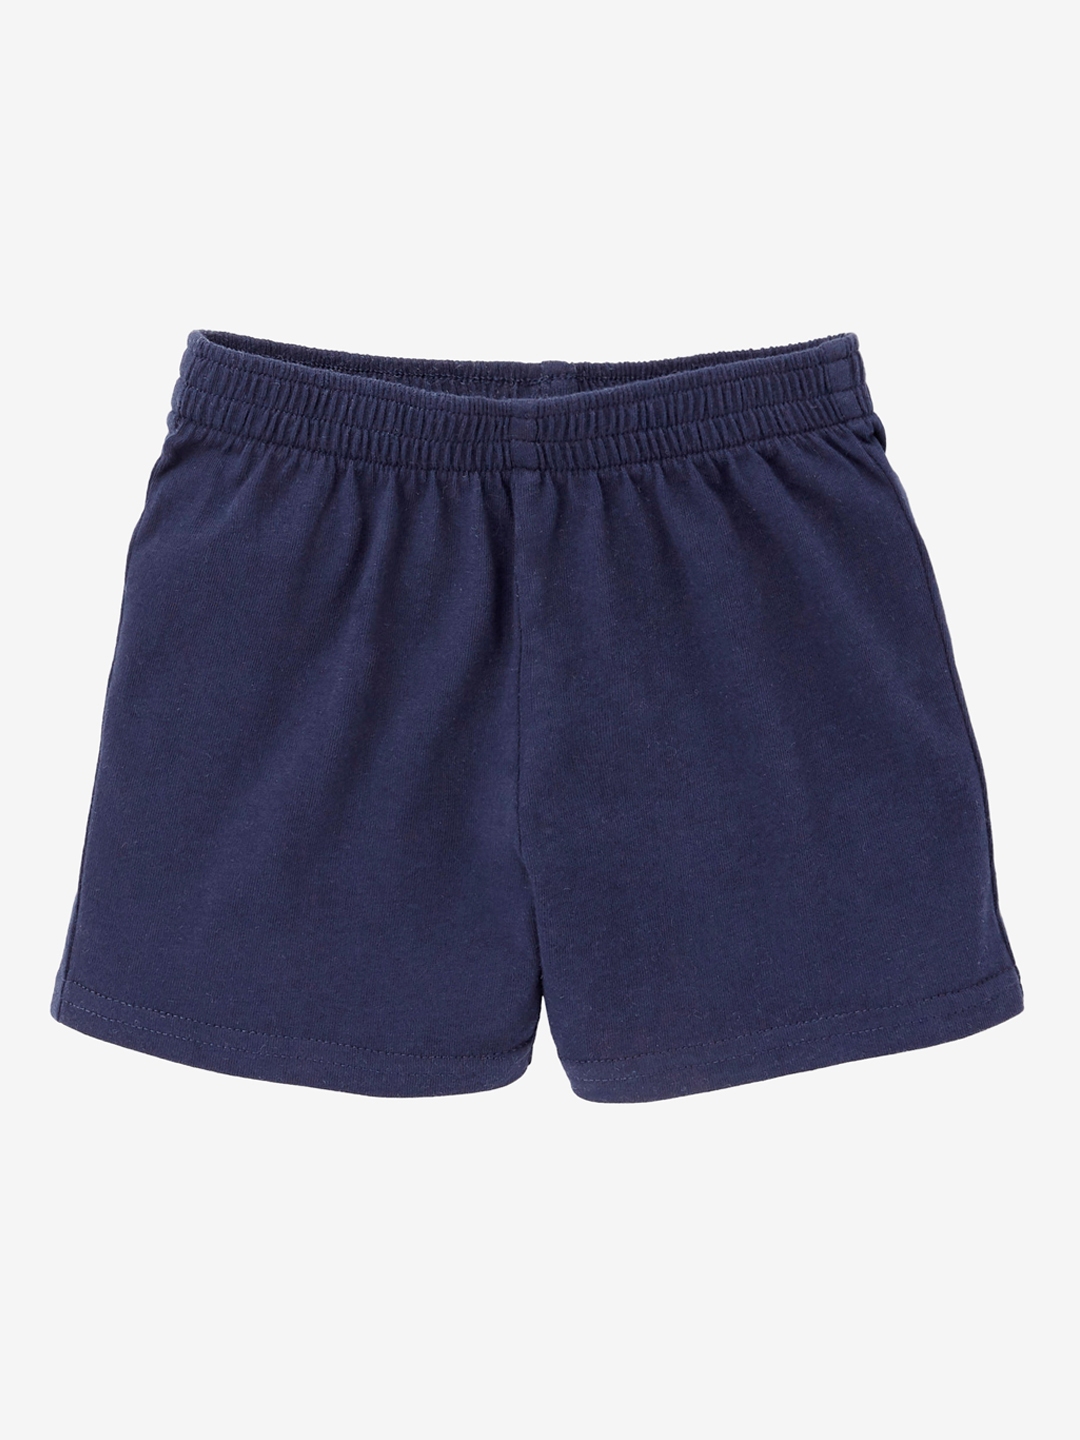 Buy Domyos By Decathlon Kids Navy Blue Solid Gym Shorts - Shorts for ...